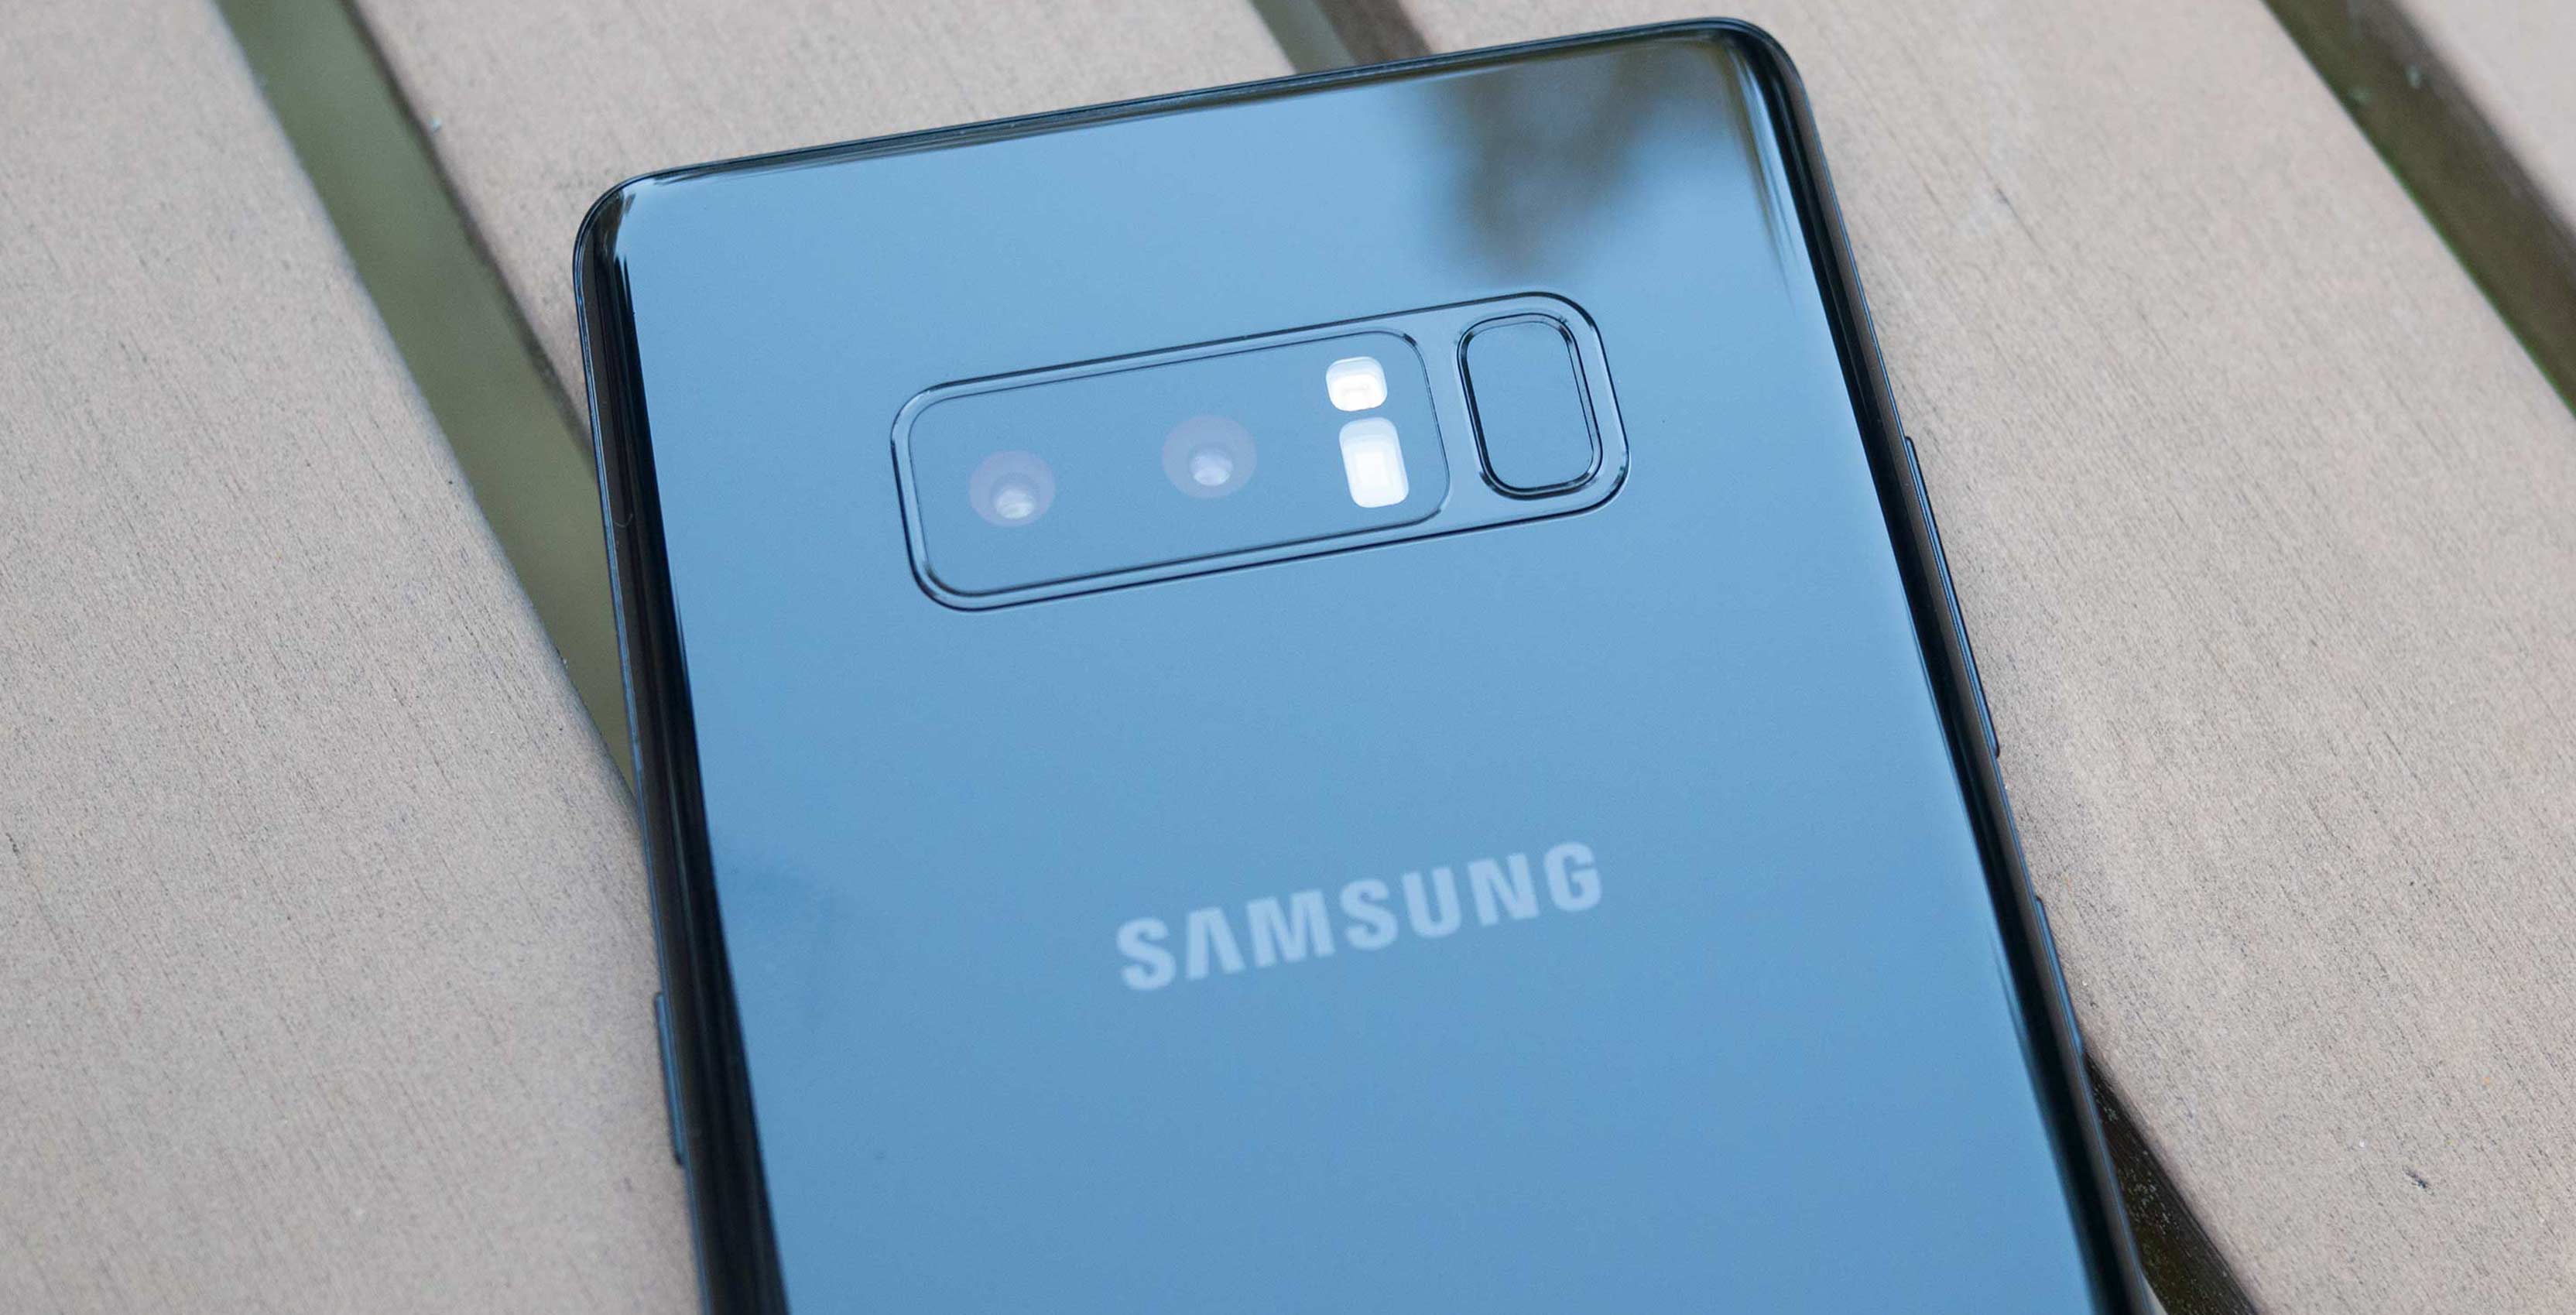 Back of Samsung Galaxy Note 8 smartphone